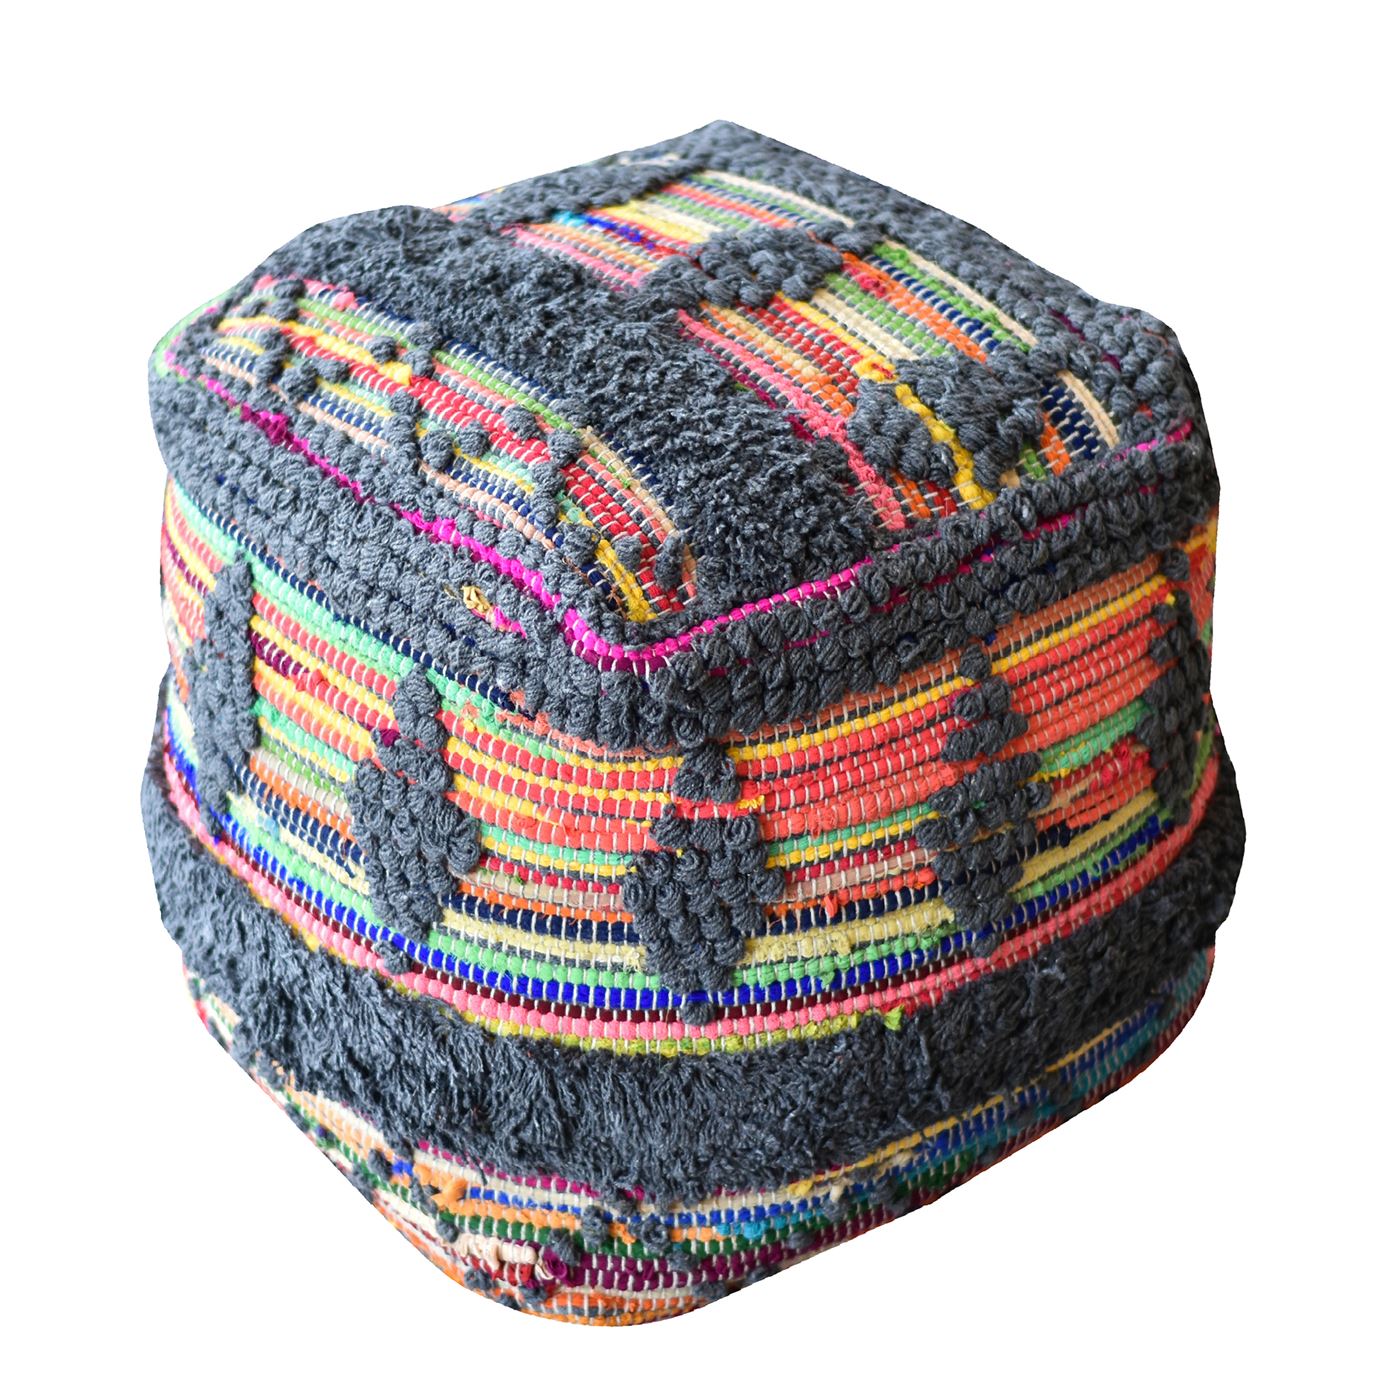 Wexford Pouf, Cotton/ Recycled Fabric, Grey/ Multi